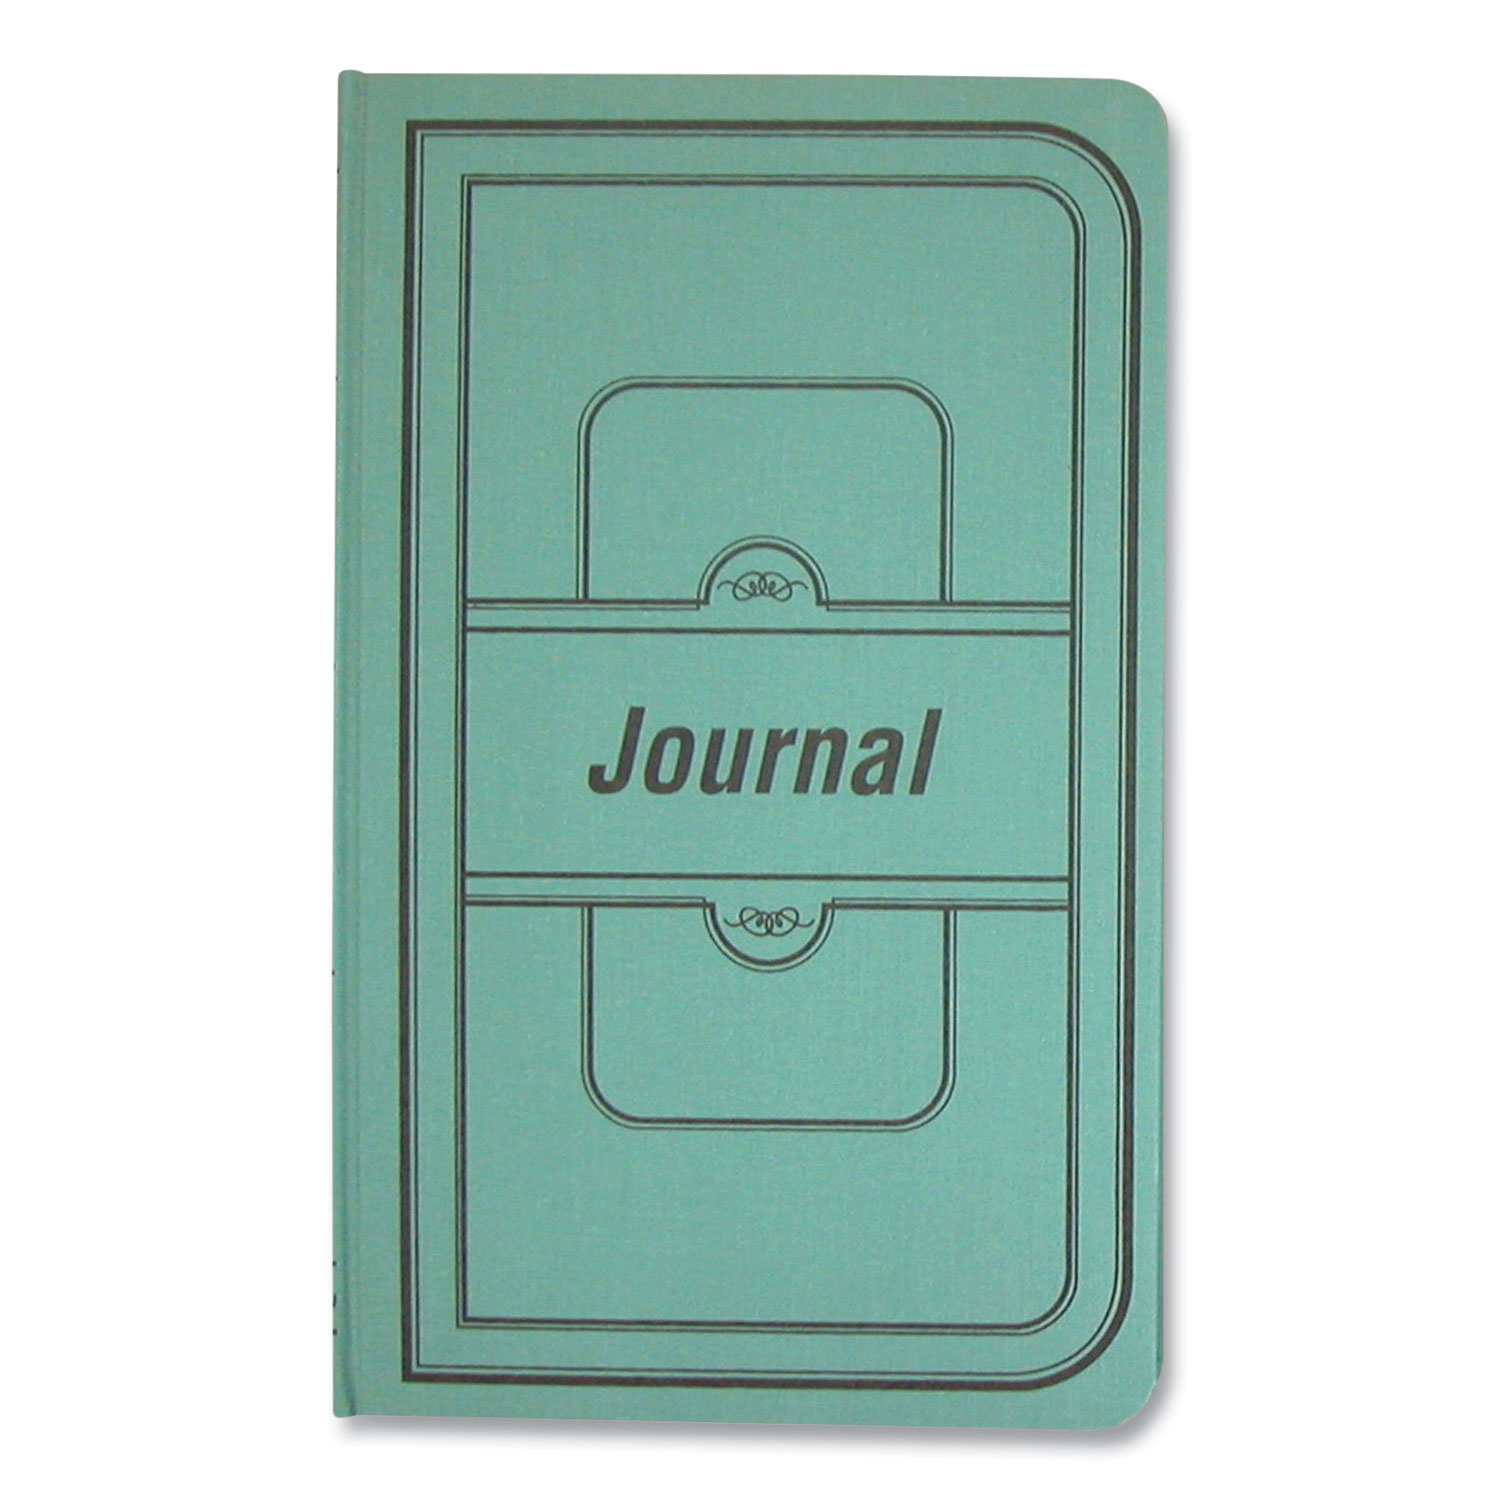 National® Tuff Series Accounting Journal, Green Cover, 7.25 x 12.13, 500 White Pages